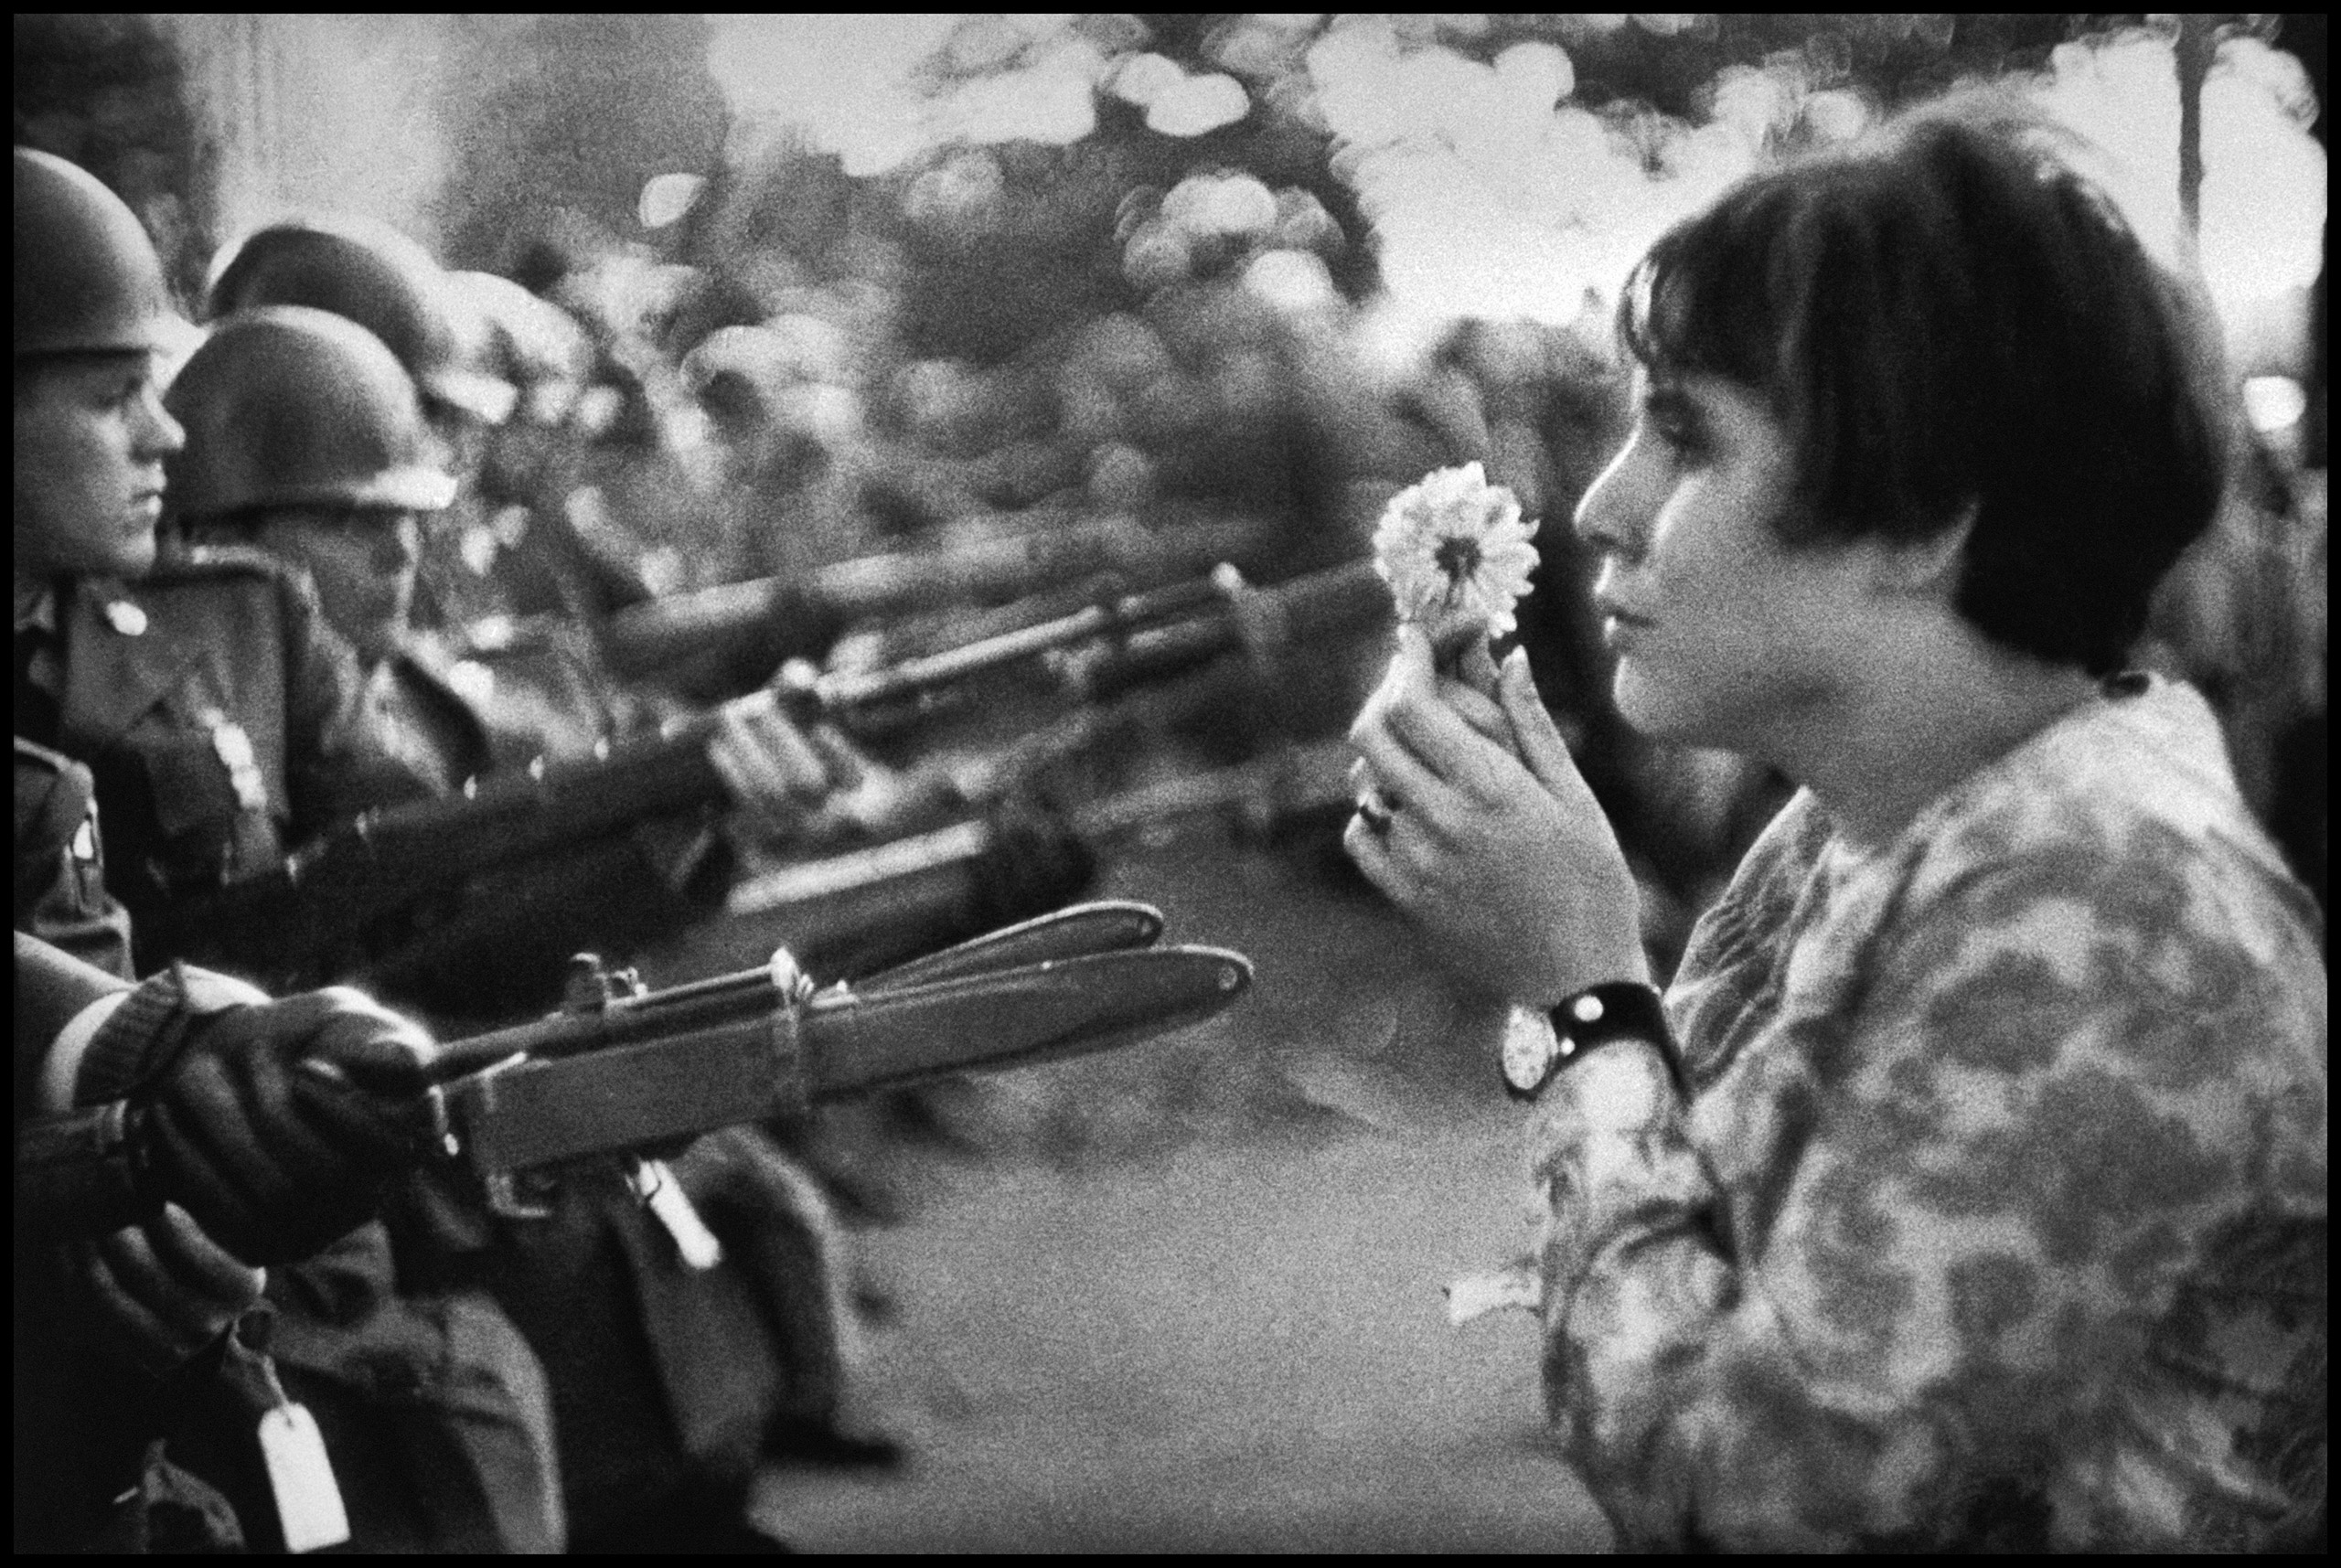 Jan Rose Kasmir confronts the American National Guard outside the Pentagon during the 1967 anti-Vietnam march. This march helped to turn public opinion against the U.S. war in Vietnam. (Marc Riboud—Magnum Photos)